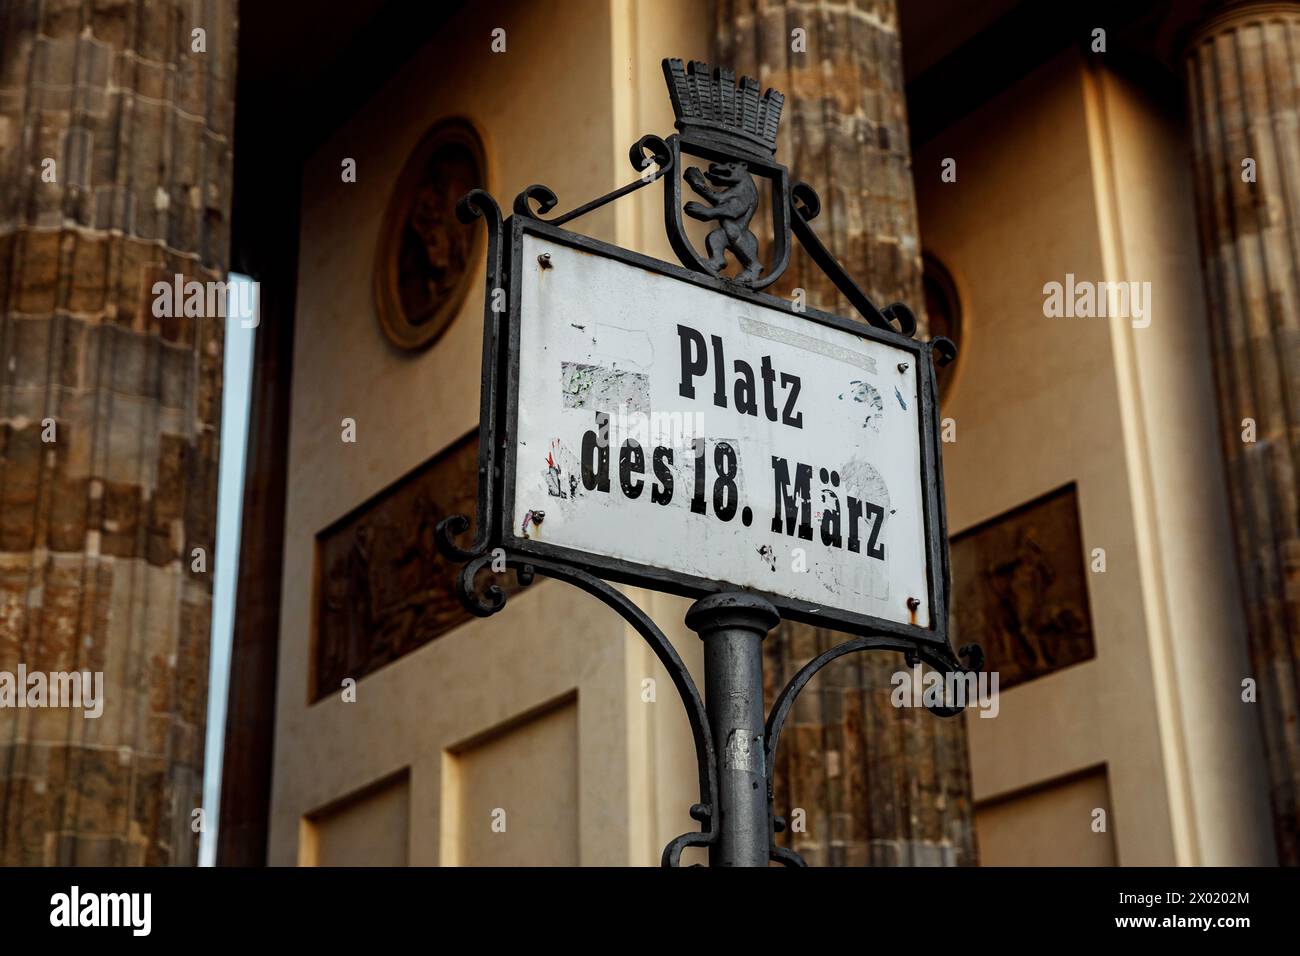 Street sign of the famous Platz des 18. Marz (March 18th Square) near the Brandenburg Gate in Berlin Stock Photo